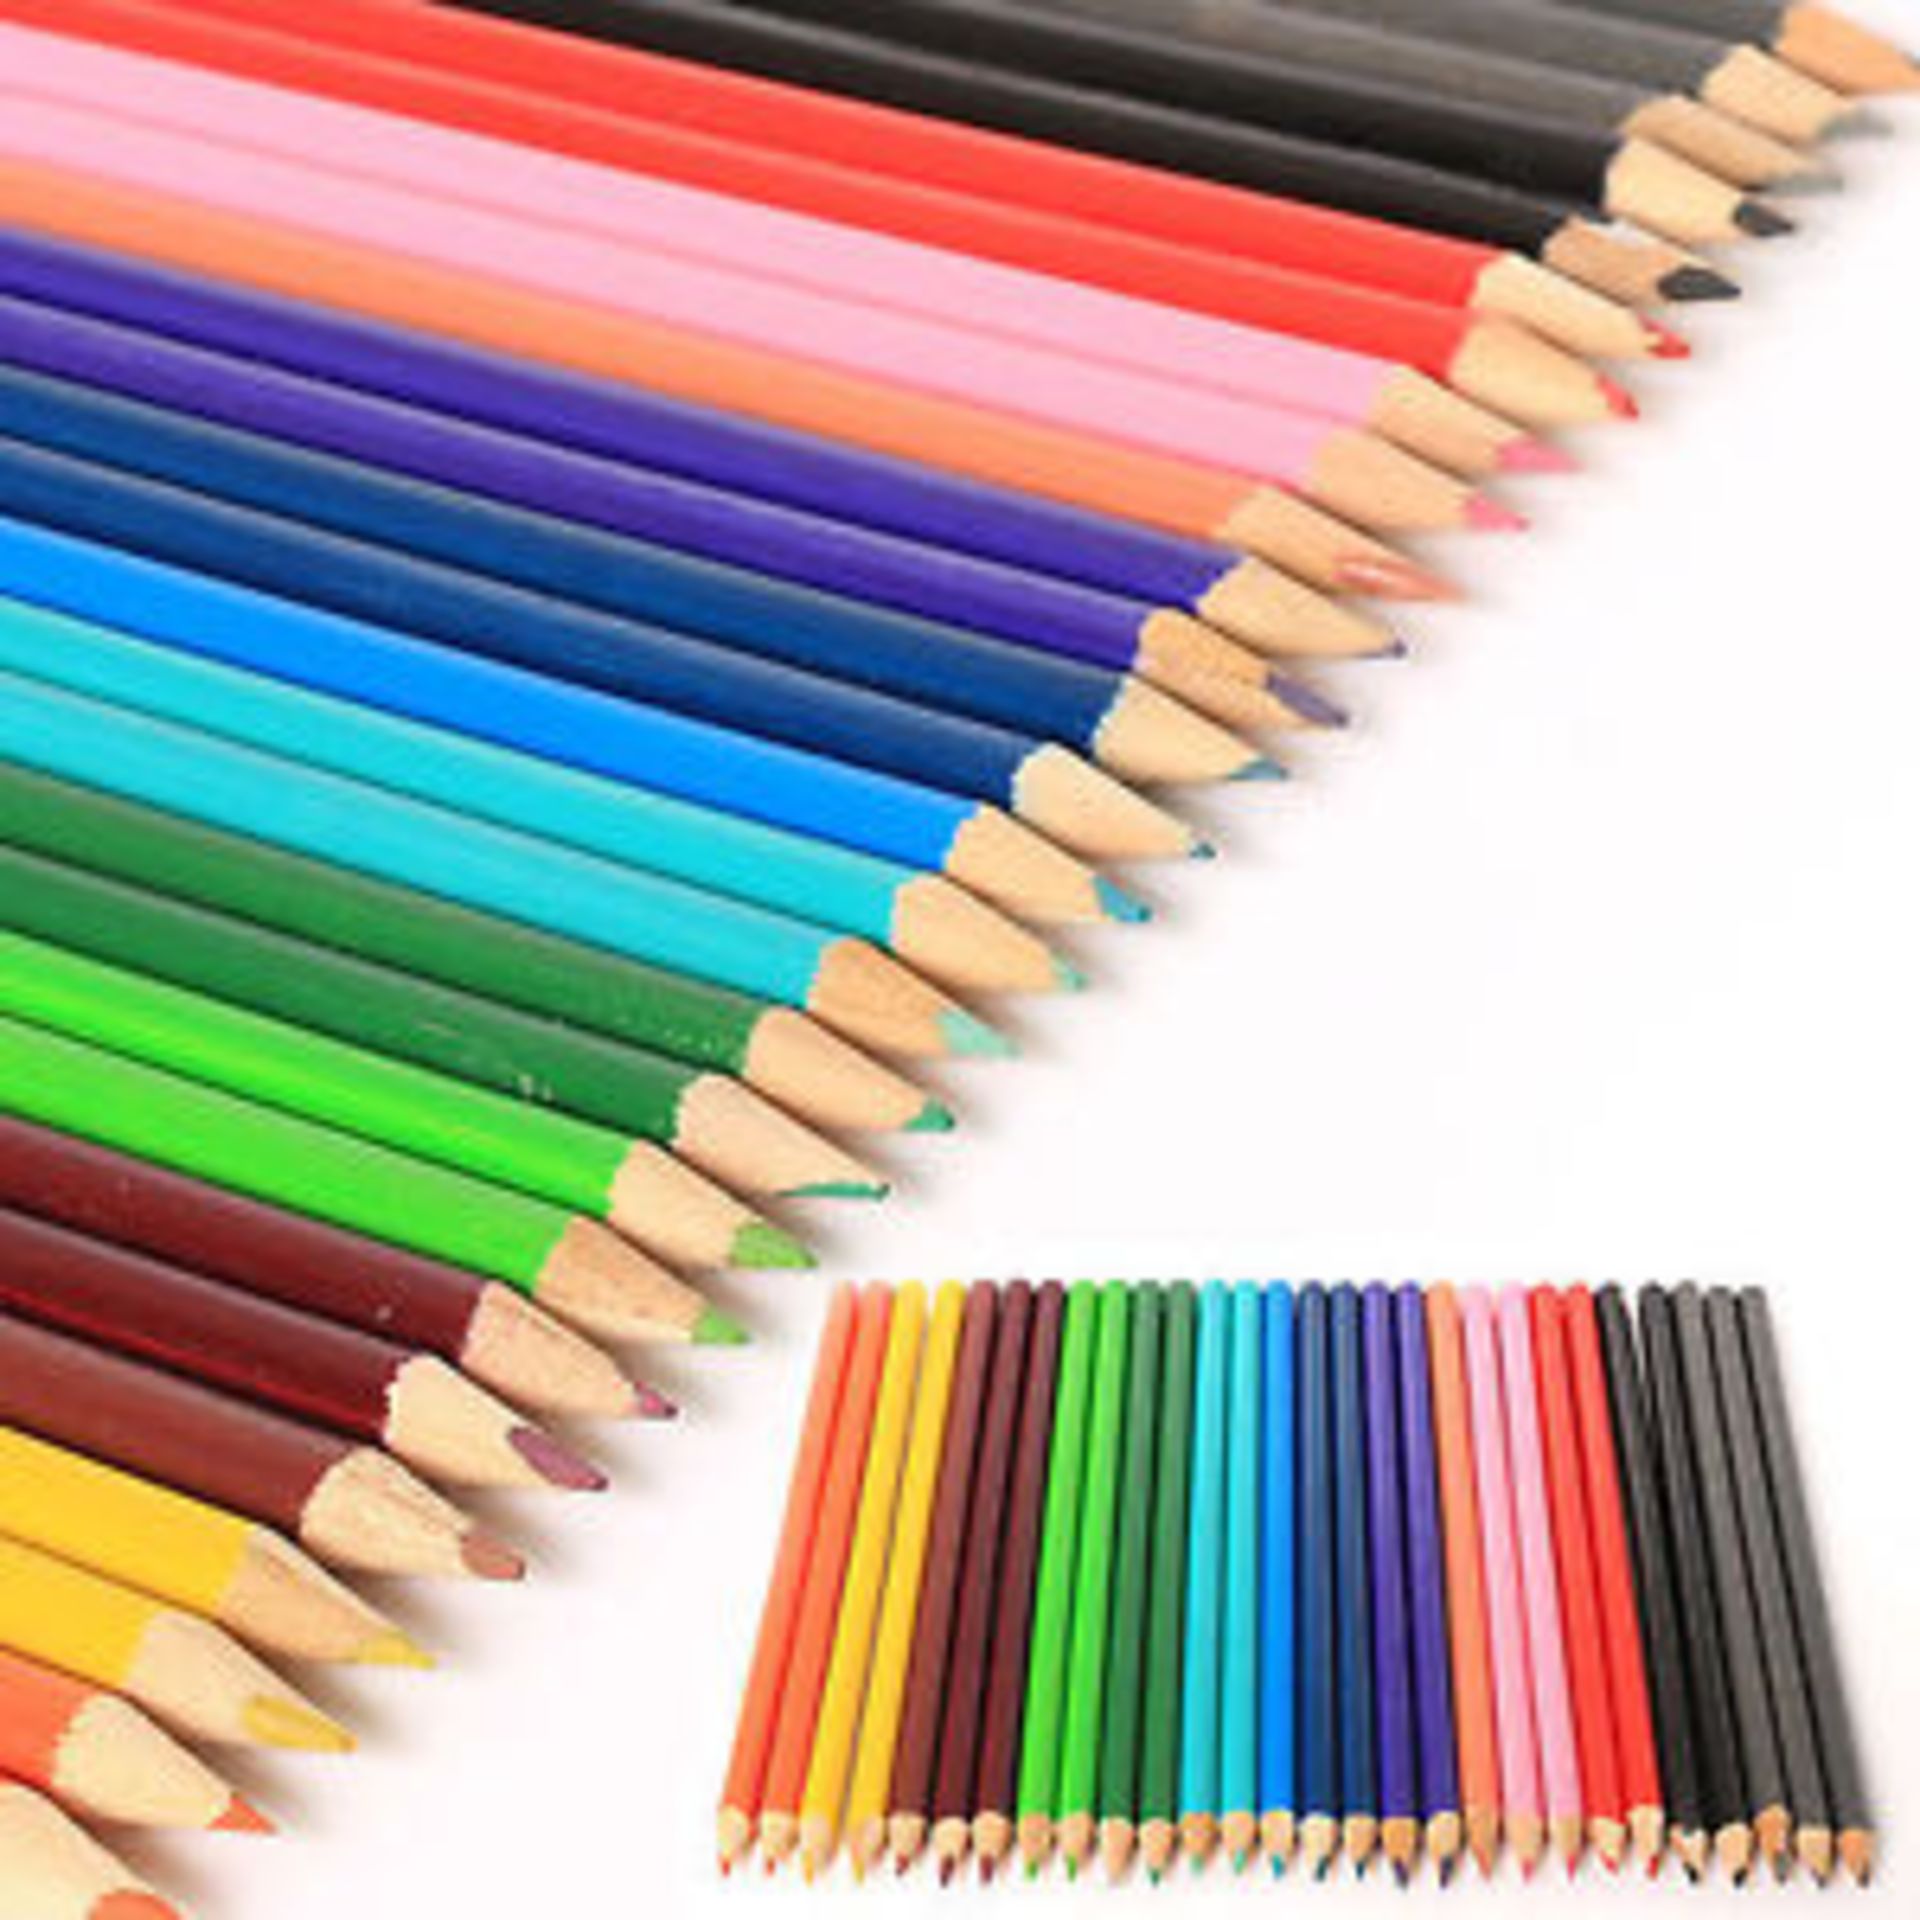 V *TRADE QTY* Brand New 30 Pack Professional Colouring Pencils - Artist Quality X 8 YOUR BID PRICE - Image 2 of 2